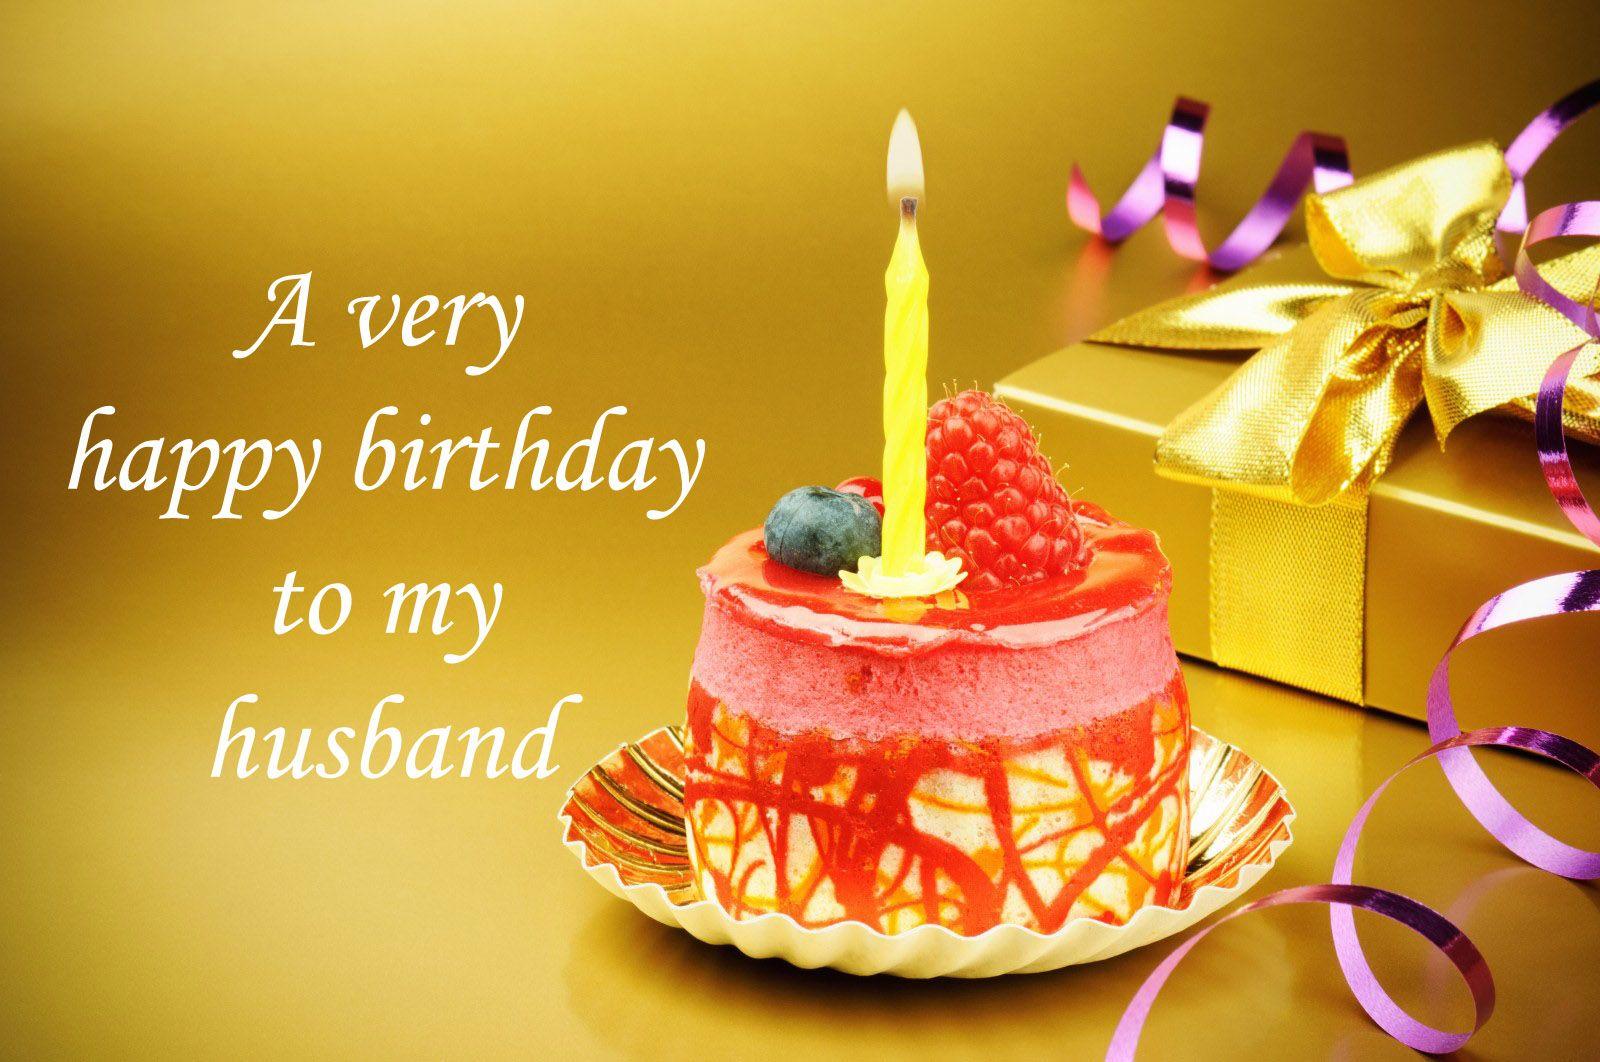 birthday wishes wallpaper for your sweet husband: wishes